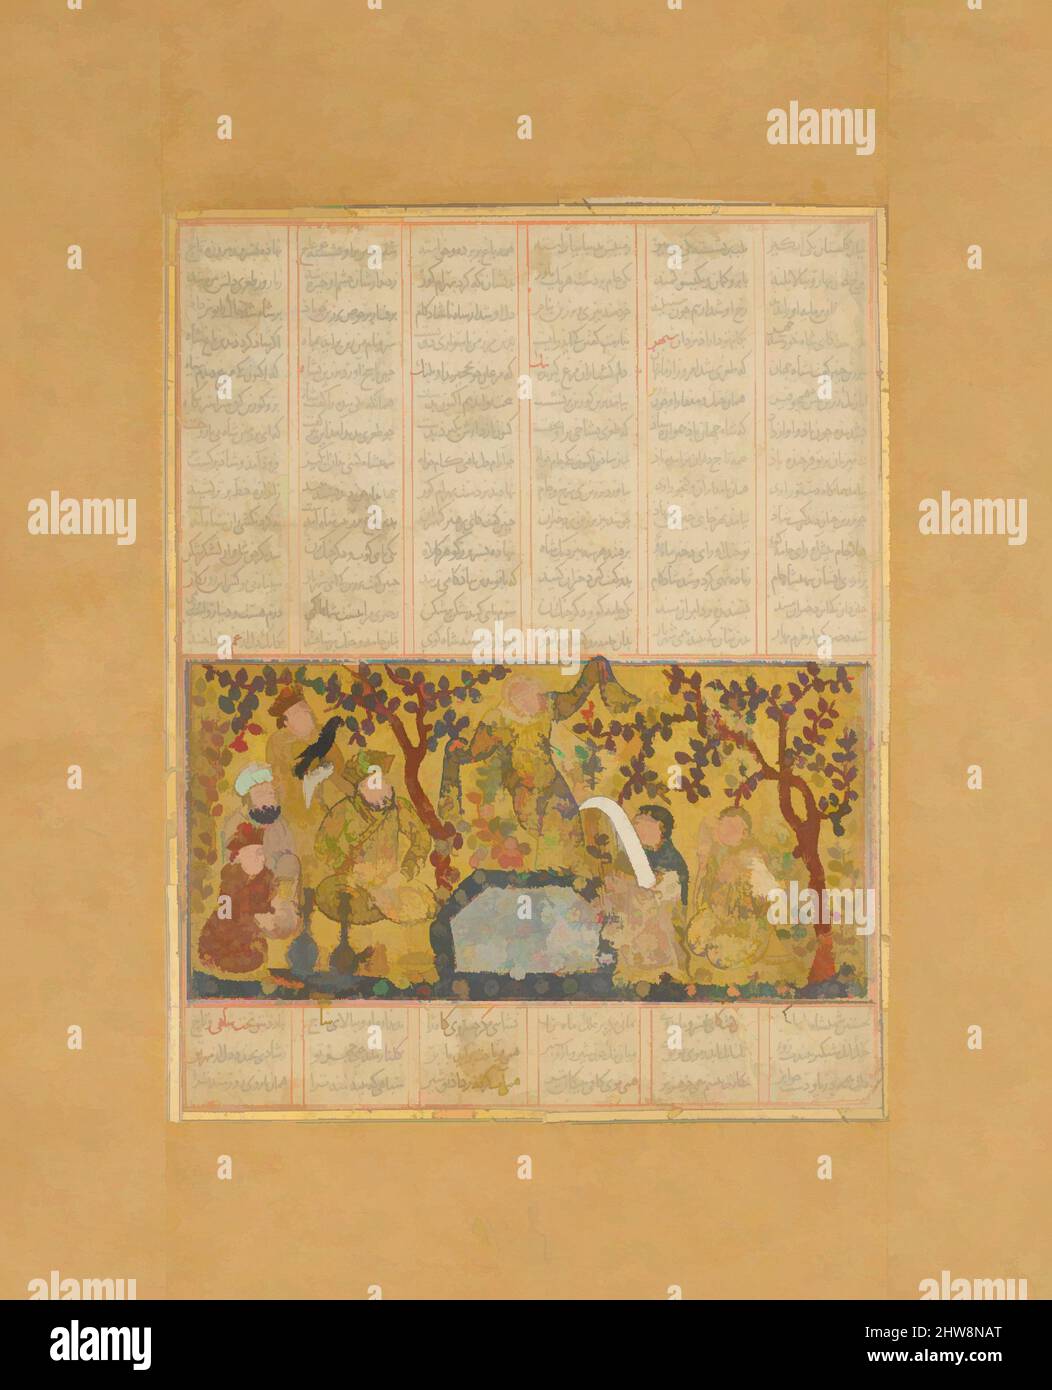 Art inspired by Bahram Gur Entertained by the Daughters of Barzin', Folio from a Shahnama (Book of Kings), 1300–1330, Attributed to Northwestern Iran or Baghdad, Ink, opaque watercolor, silver, and gold on paper, Text block: 6 3/16 x 4 13/16 in. (15.7 x 12.2 cm), Codices, This scene, Classic works modernized by Artotop with a splash of modernity. Shapes, color and value, eye-catching visual impact on art. Emotions through freedom of artworks in a contemporary way. A timeless message pursuing a wildly creative new direction. Artists turning to the digital medium and creating the Artotop NFT Stock Photo